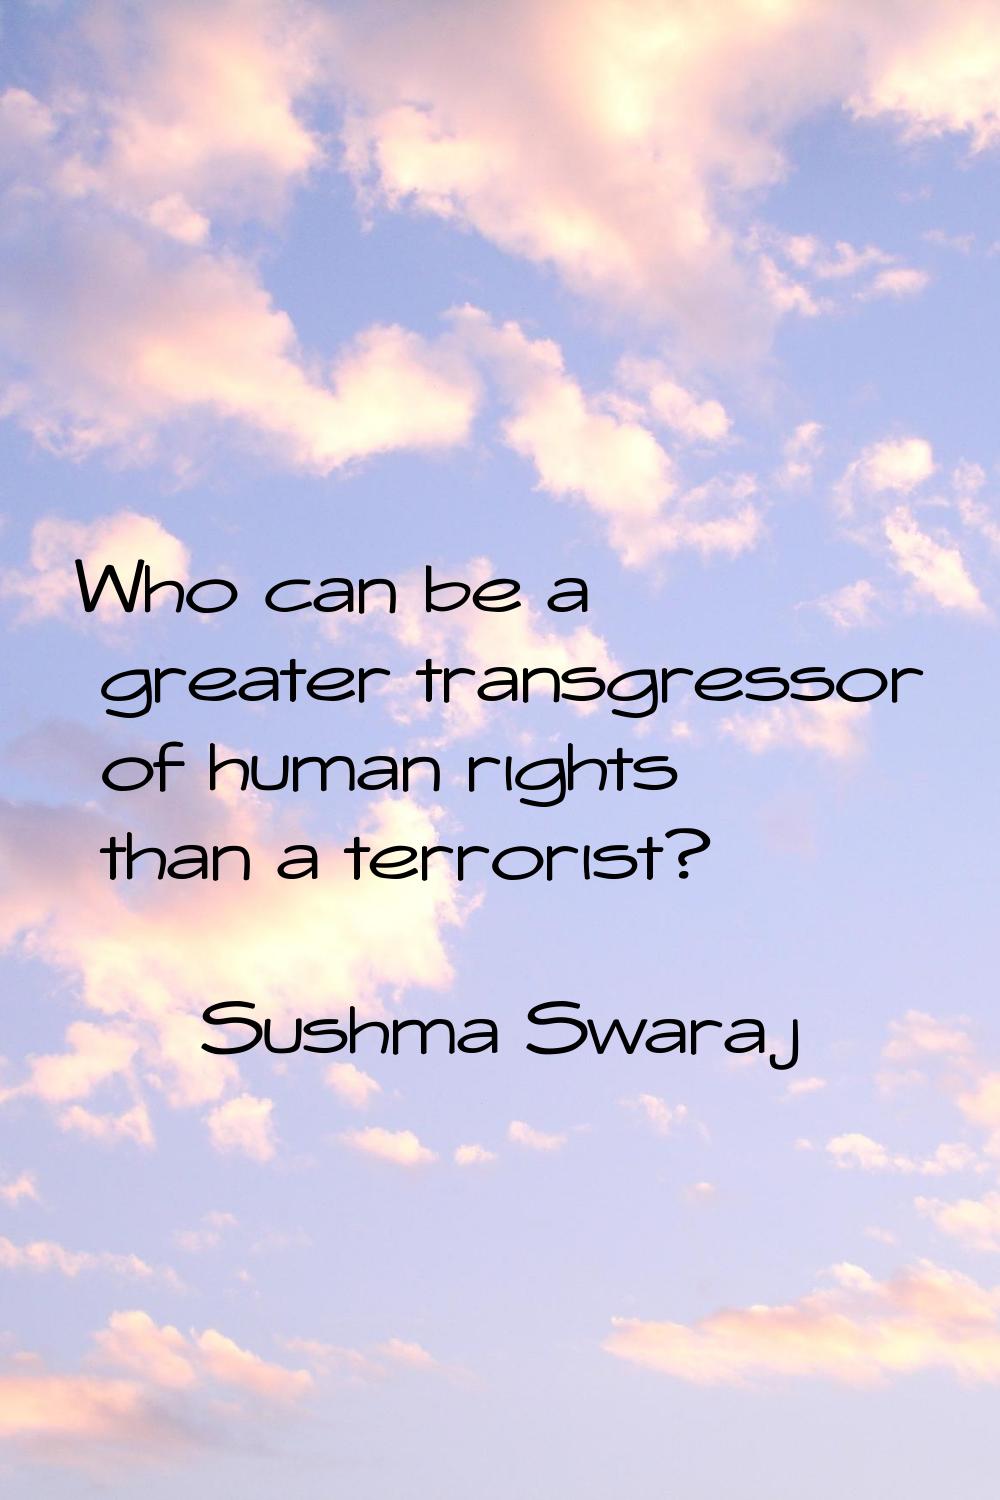 Who can be a greater transgressor of human rights than a terrorist?